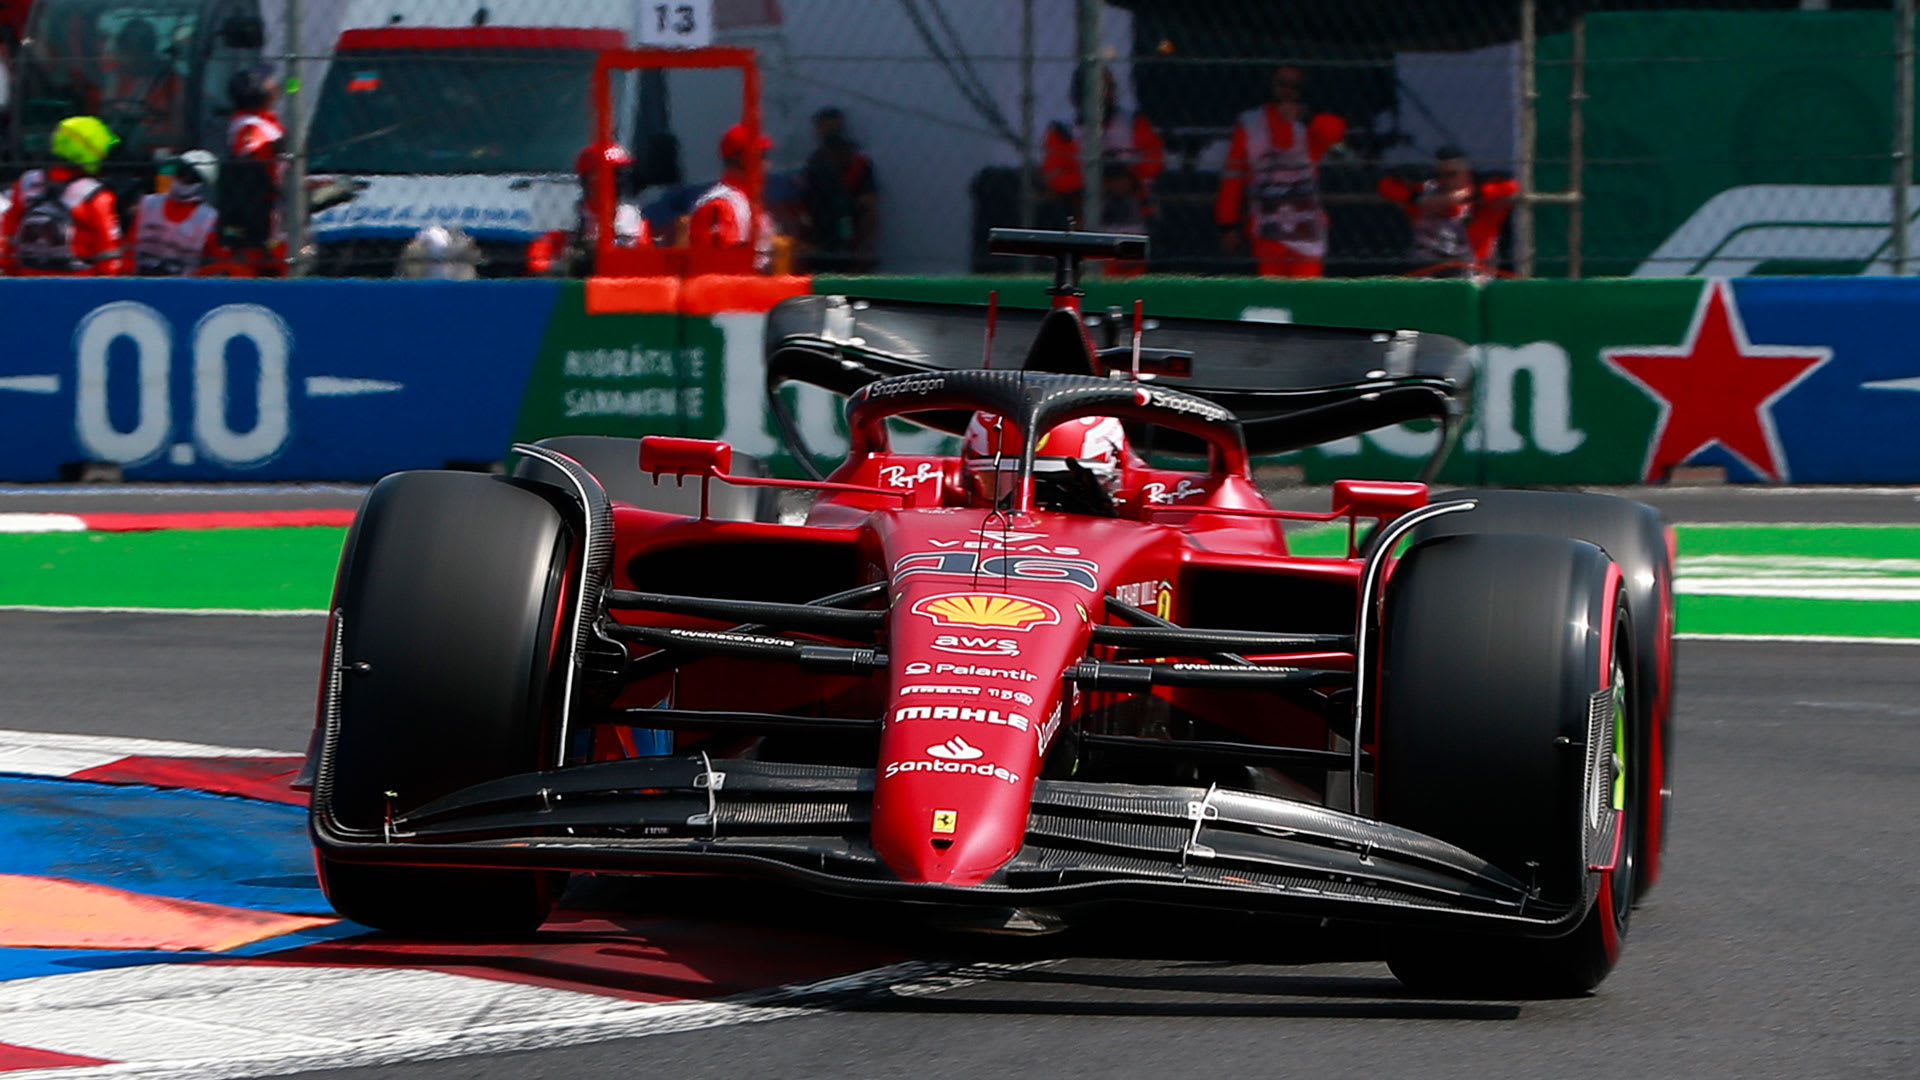 Leclerc reveals problem that prevented pole challenge in Mexico City as Ferrari drivers take P5 and P7 | Formula 1® - Formula 1